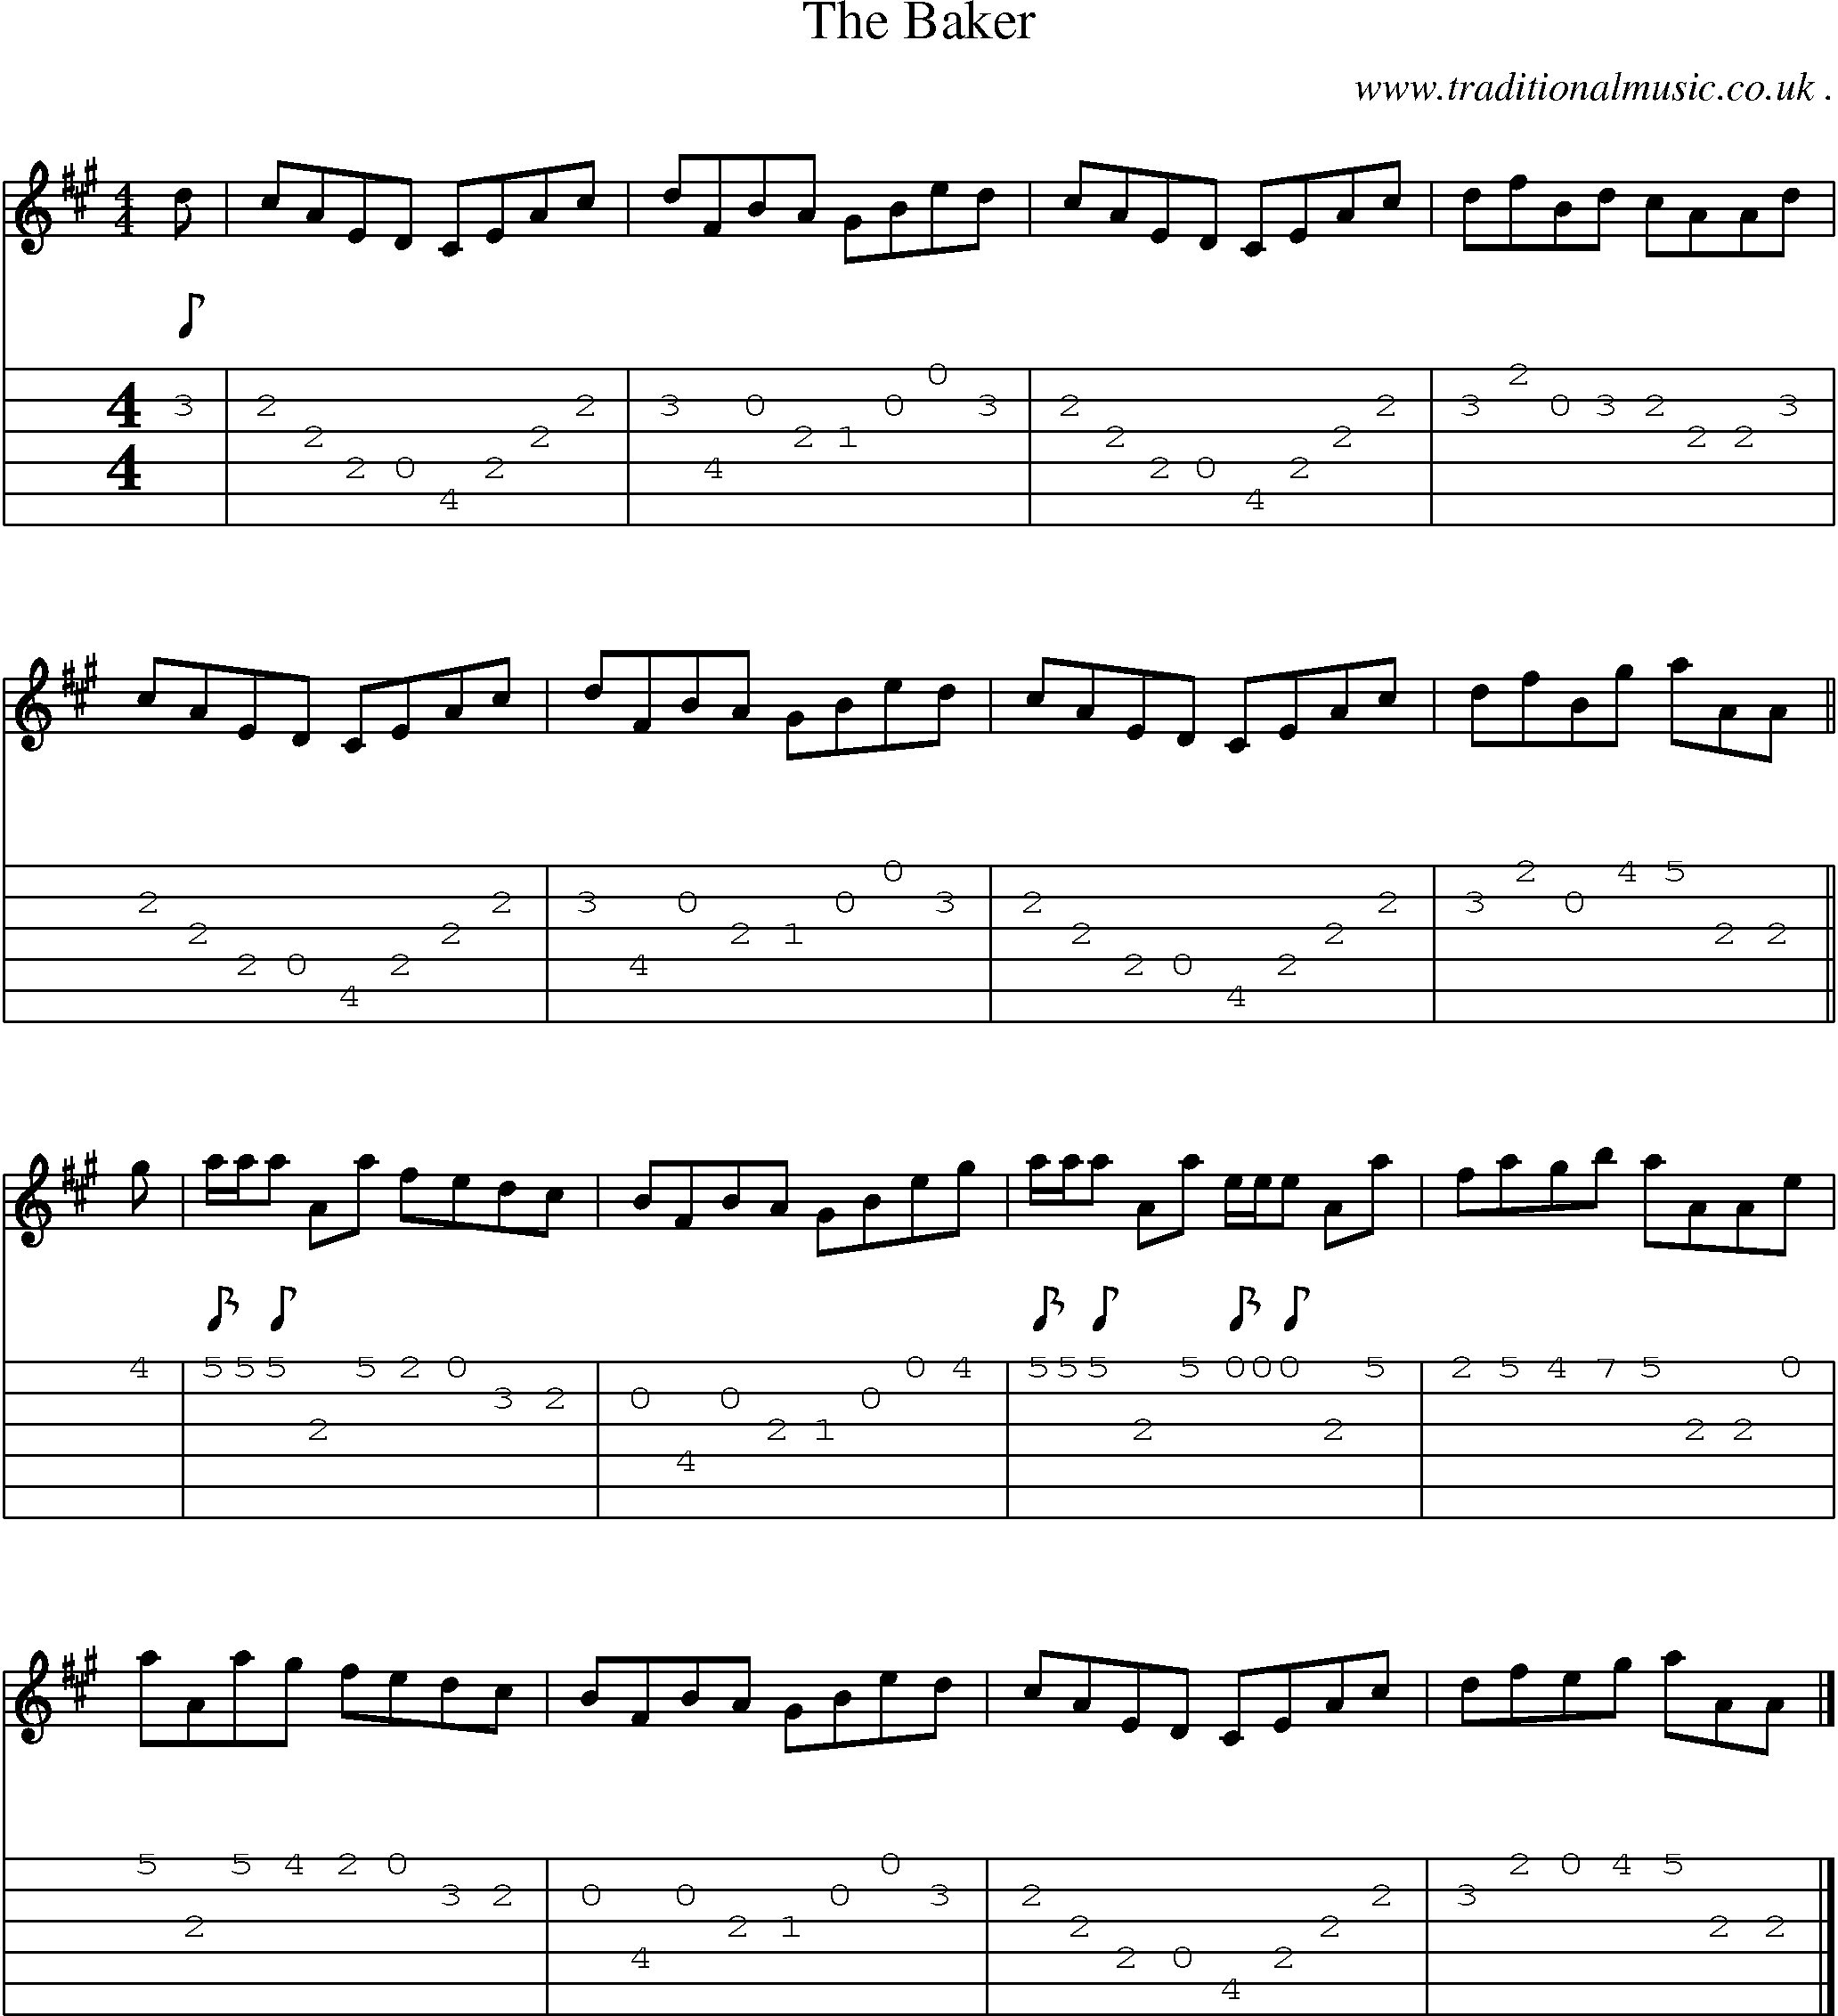 Sheet-music  score, Chords and Guitar Tabs for The Baker